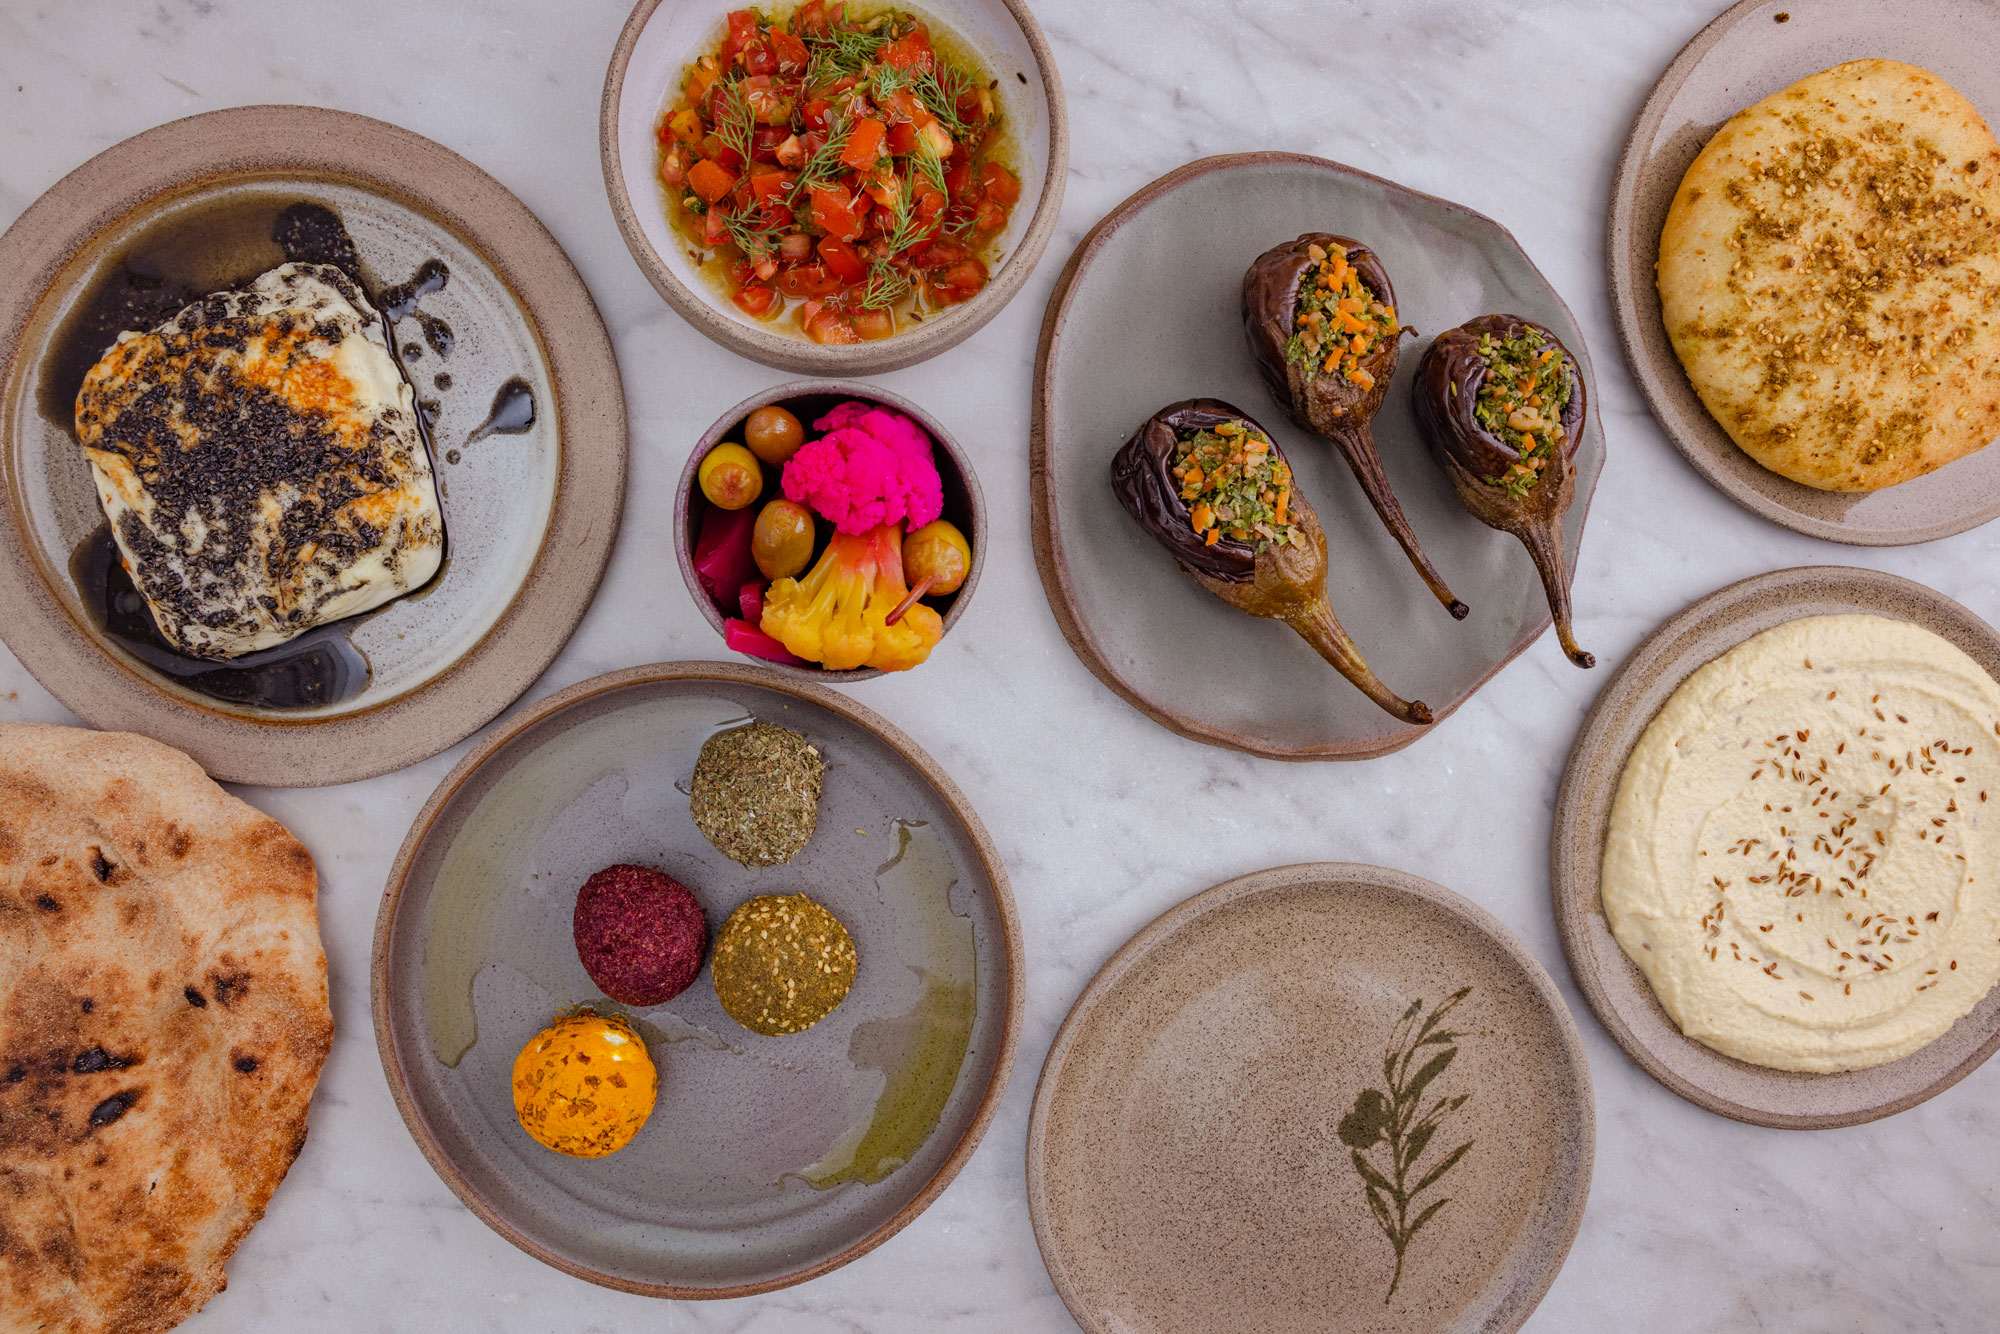 A birdseye view of pickles, breads, aubergines, tomatoes, cheese, and lentil balls on Palestinian ceramics.